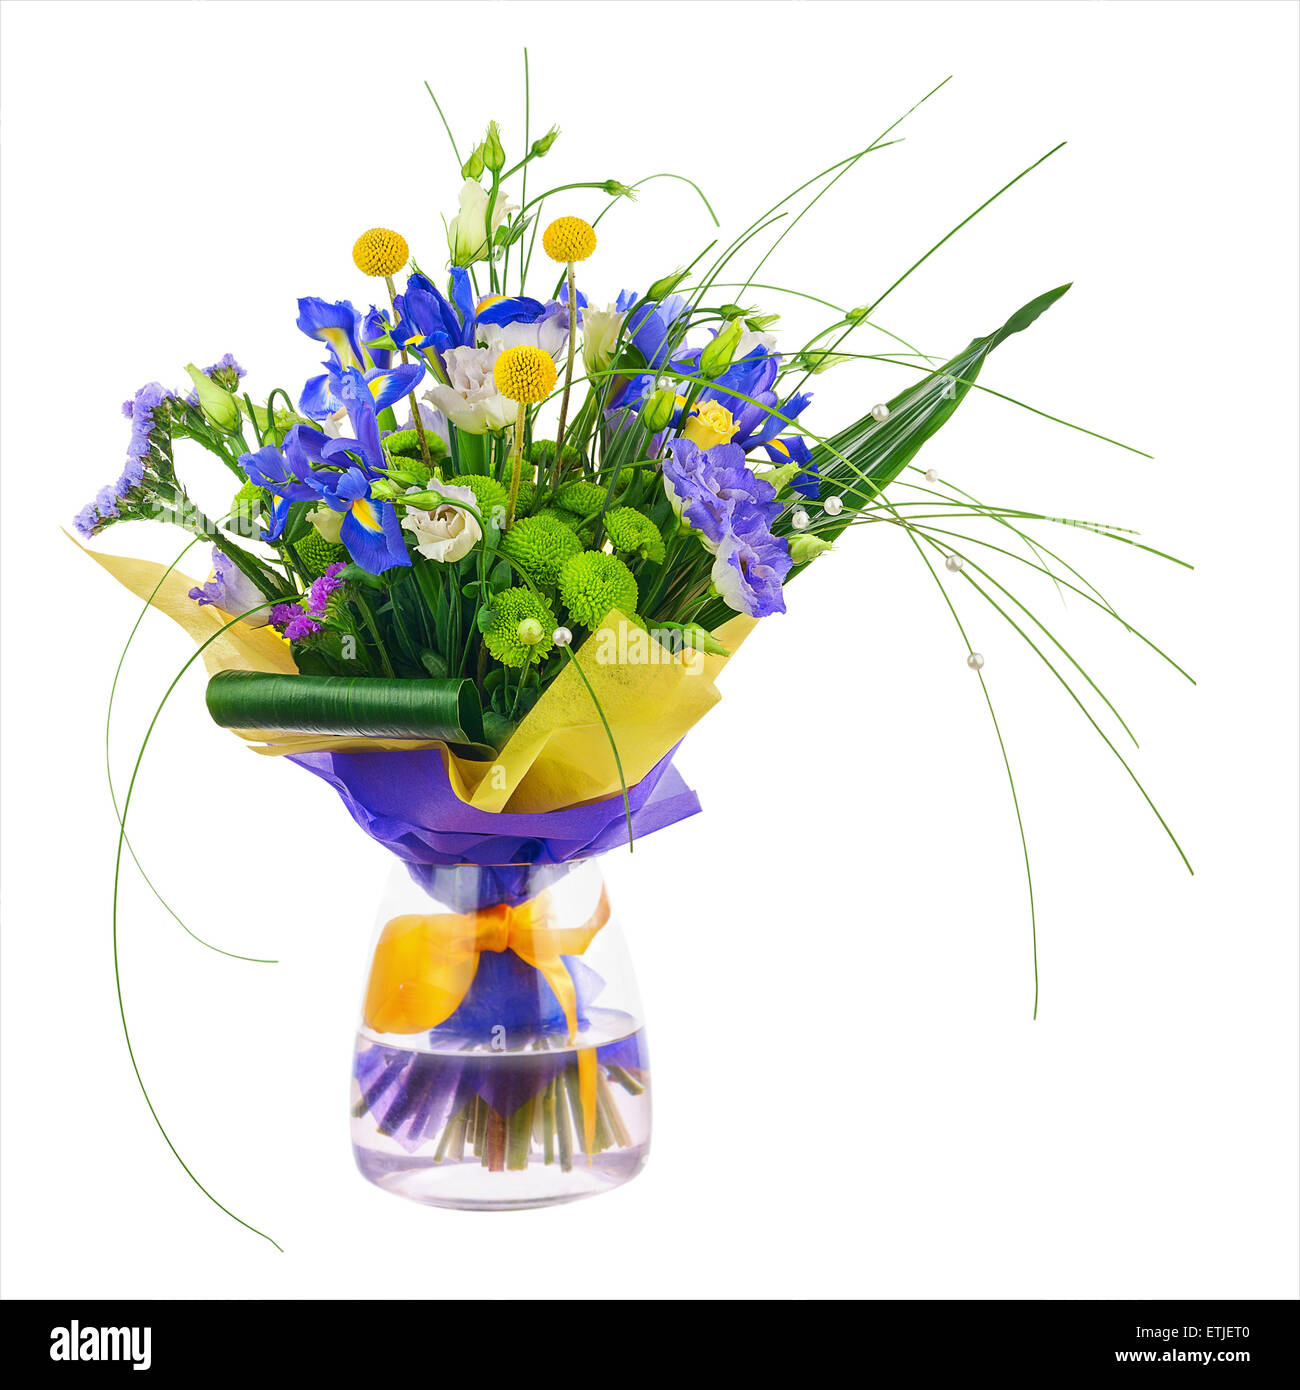 Flower bouquet from roses, green carnation, iris and statice flowers in glass vase isolated on white background. Closeup. Stock Photo